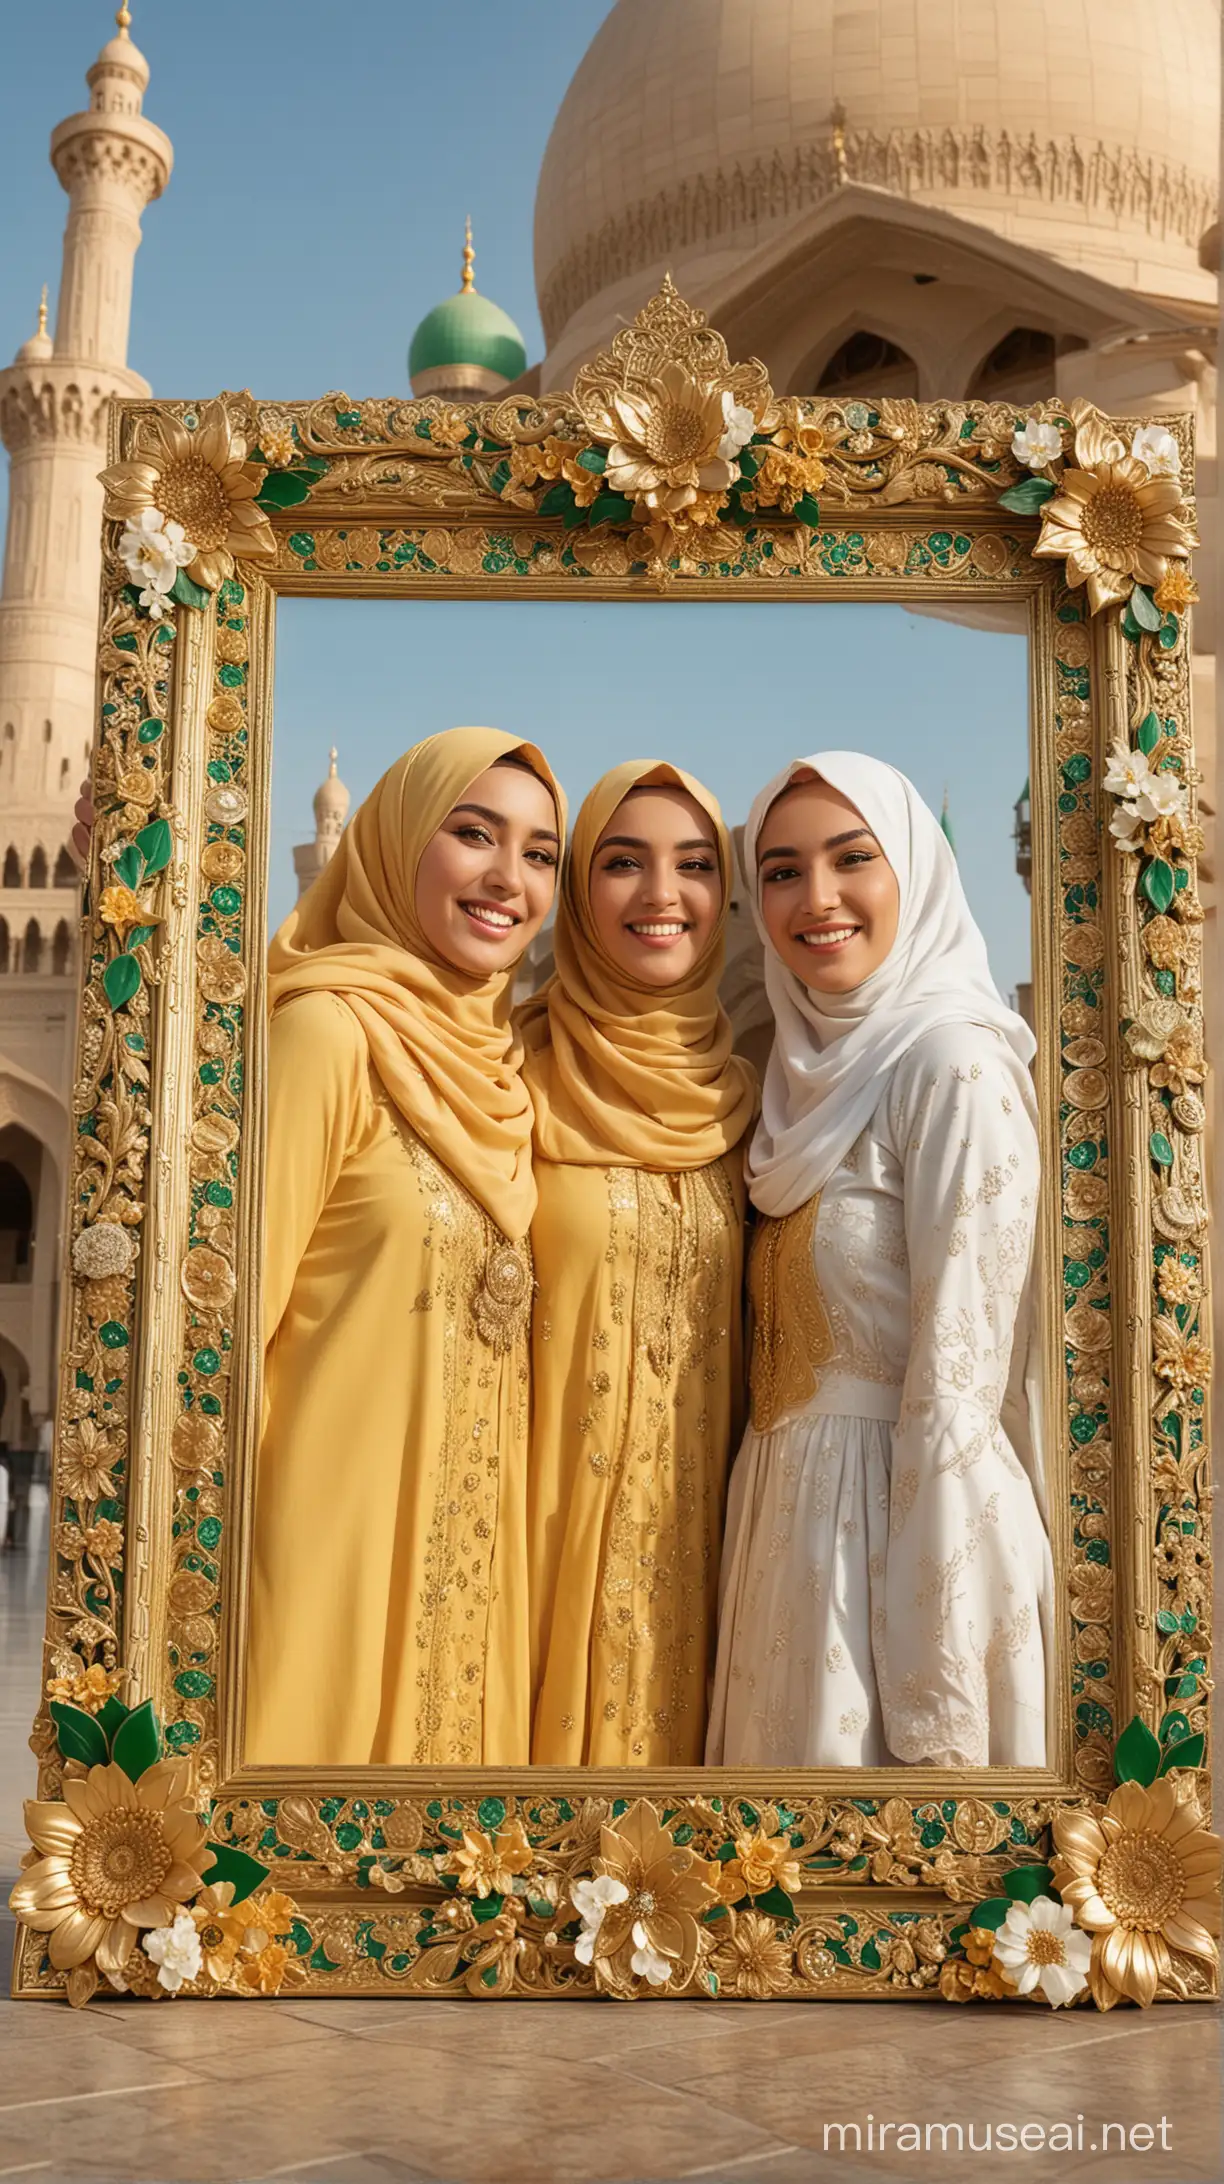 Eid alFitr Celebration Young Women in Hijabs at Magnificent Mosque